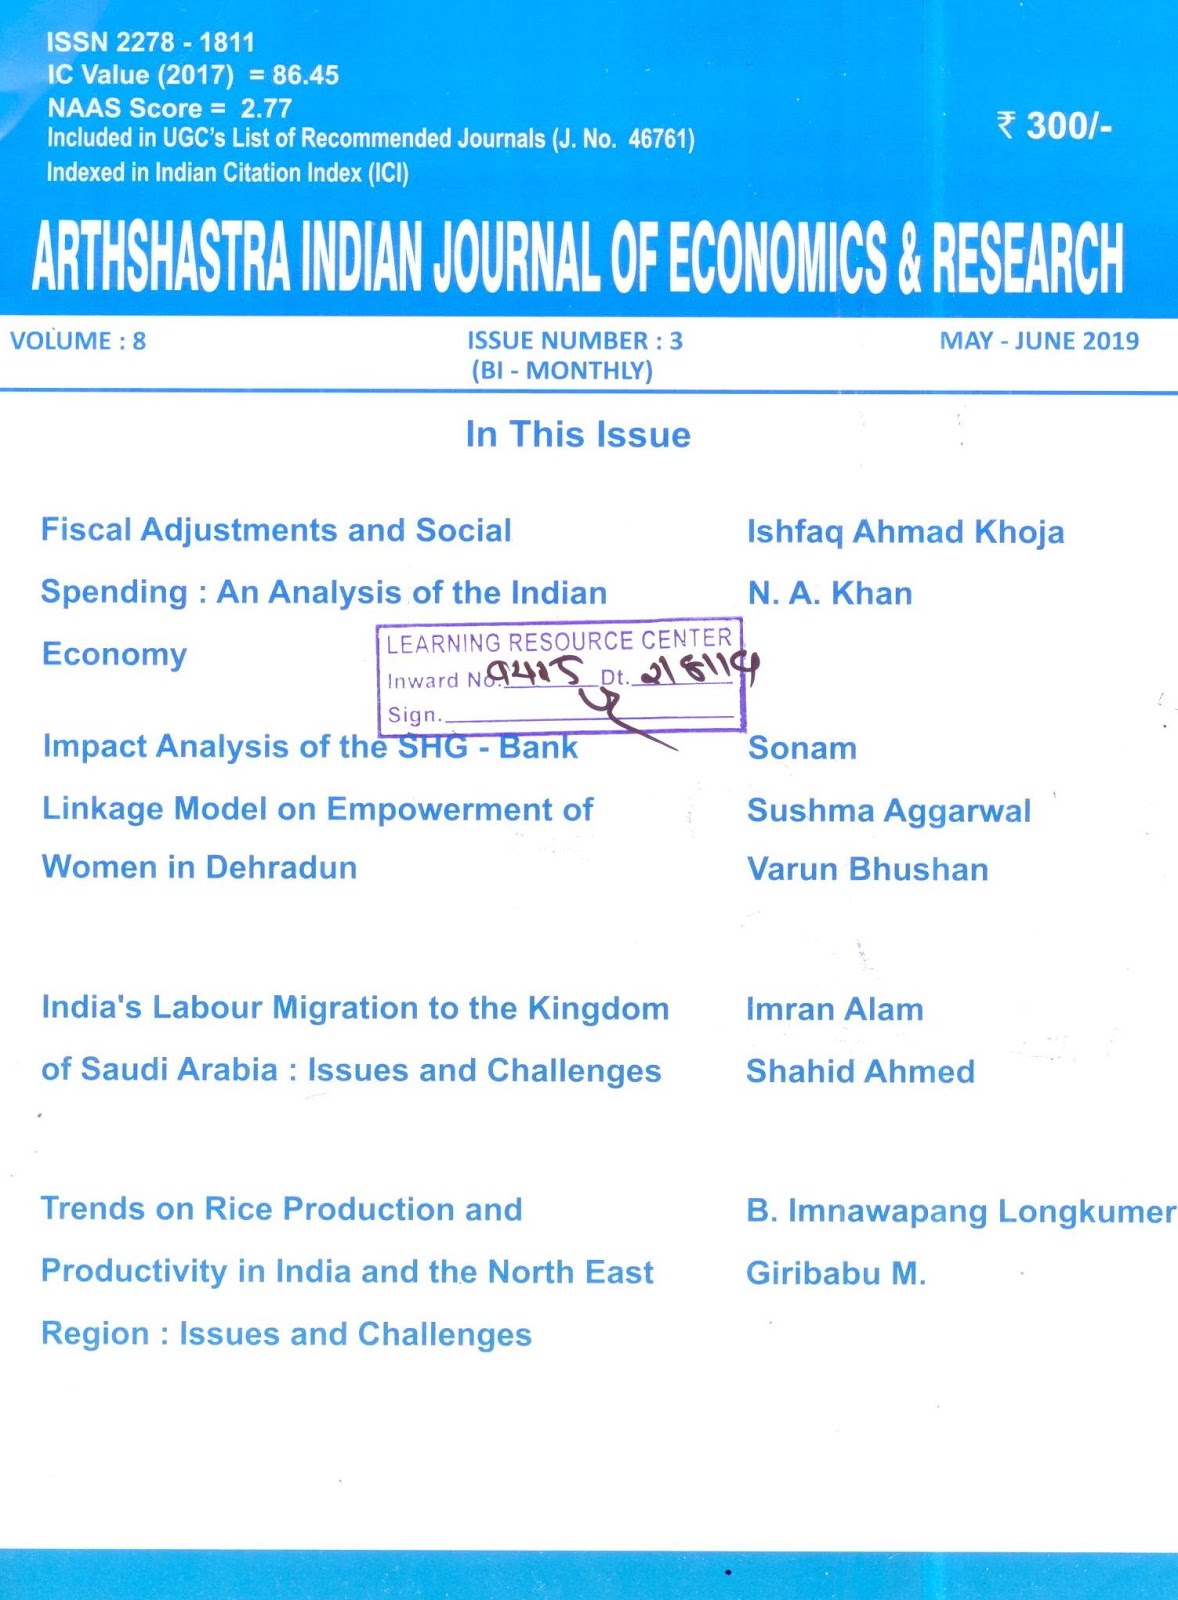 http://indianjournalofeconomicsandresearch.com/index.php/aijer/issue/view/8599